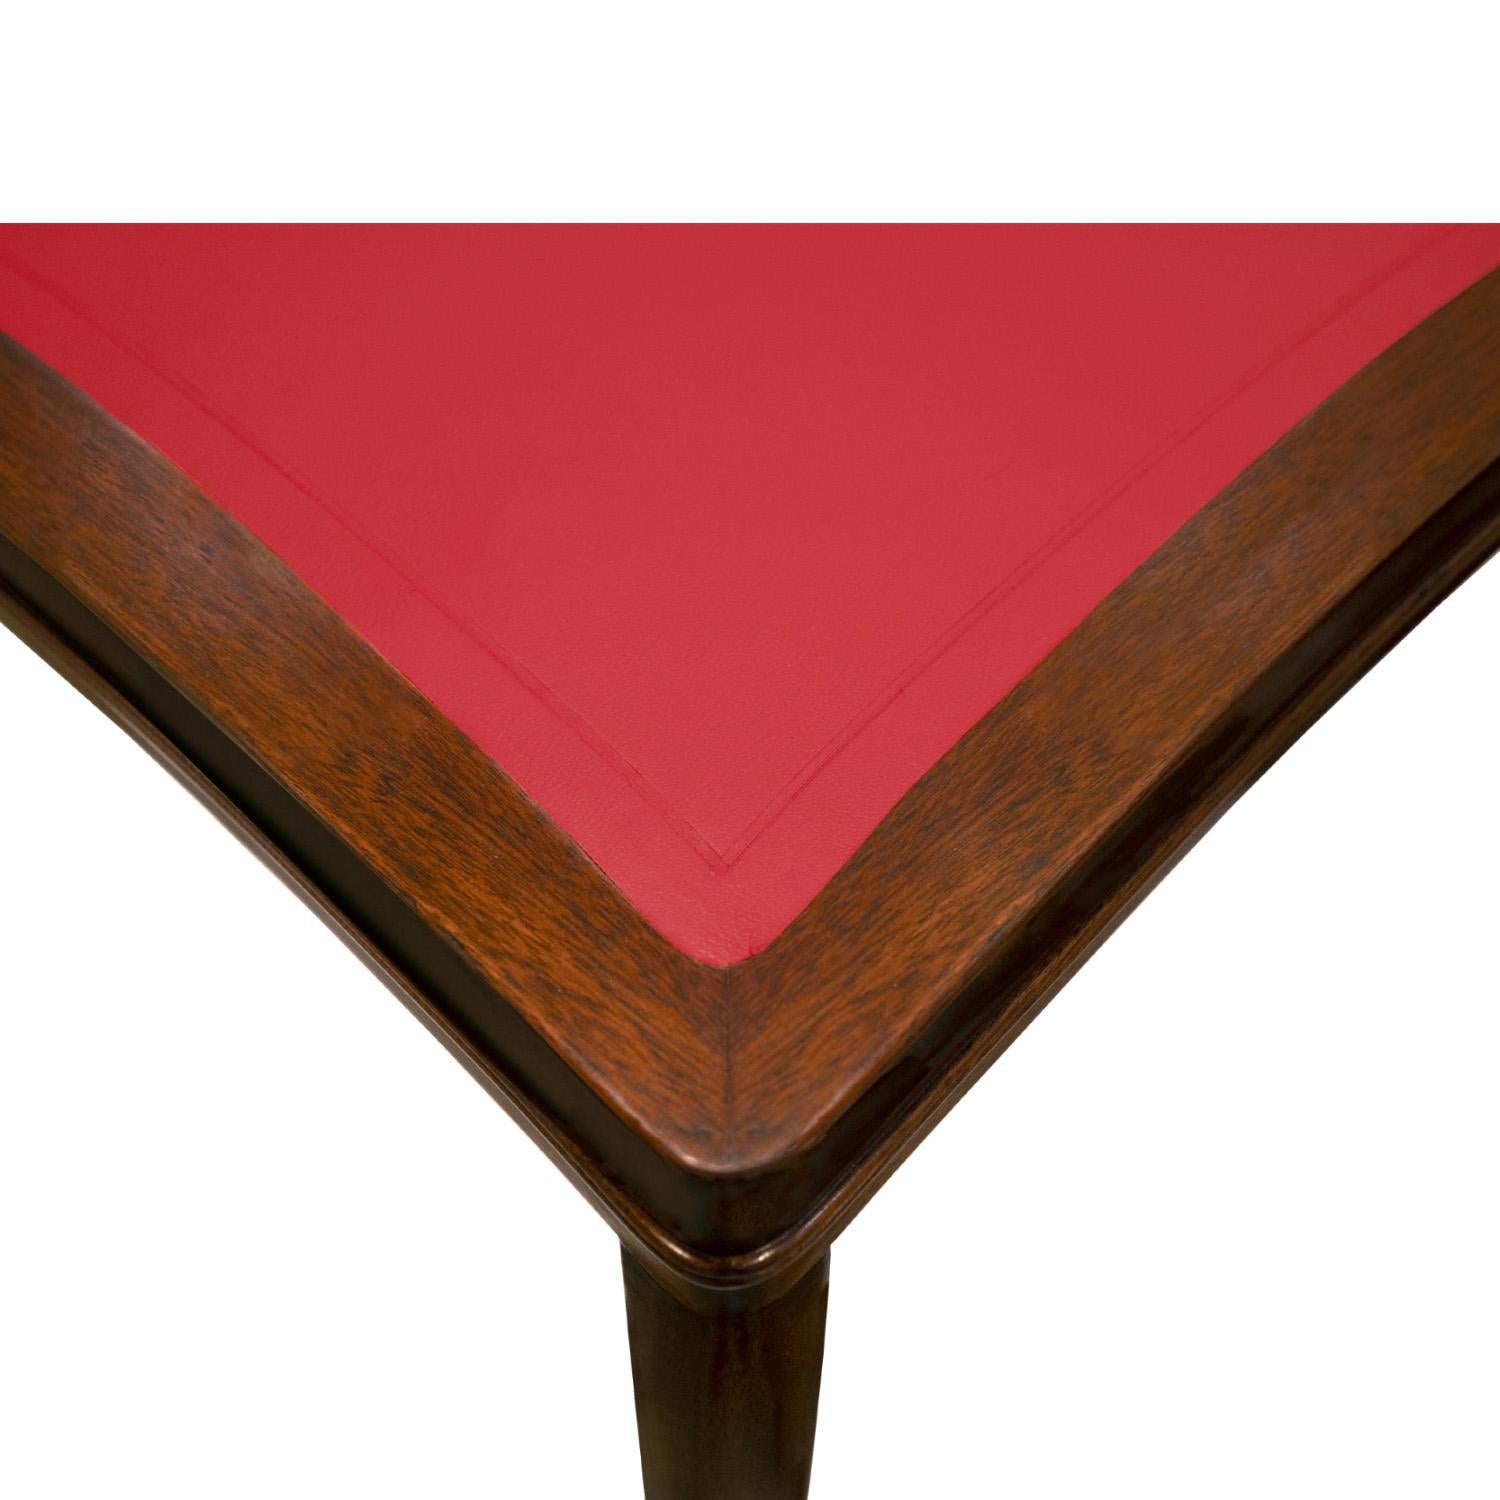 American Edward Wormley Elegant Game Table with Red Leather Top 1940s 'Signed' For Sale